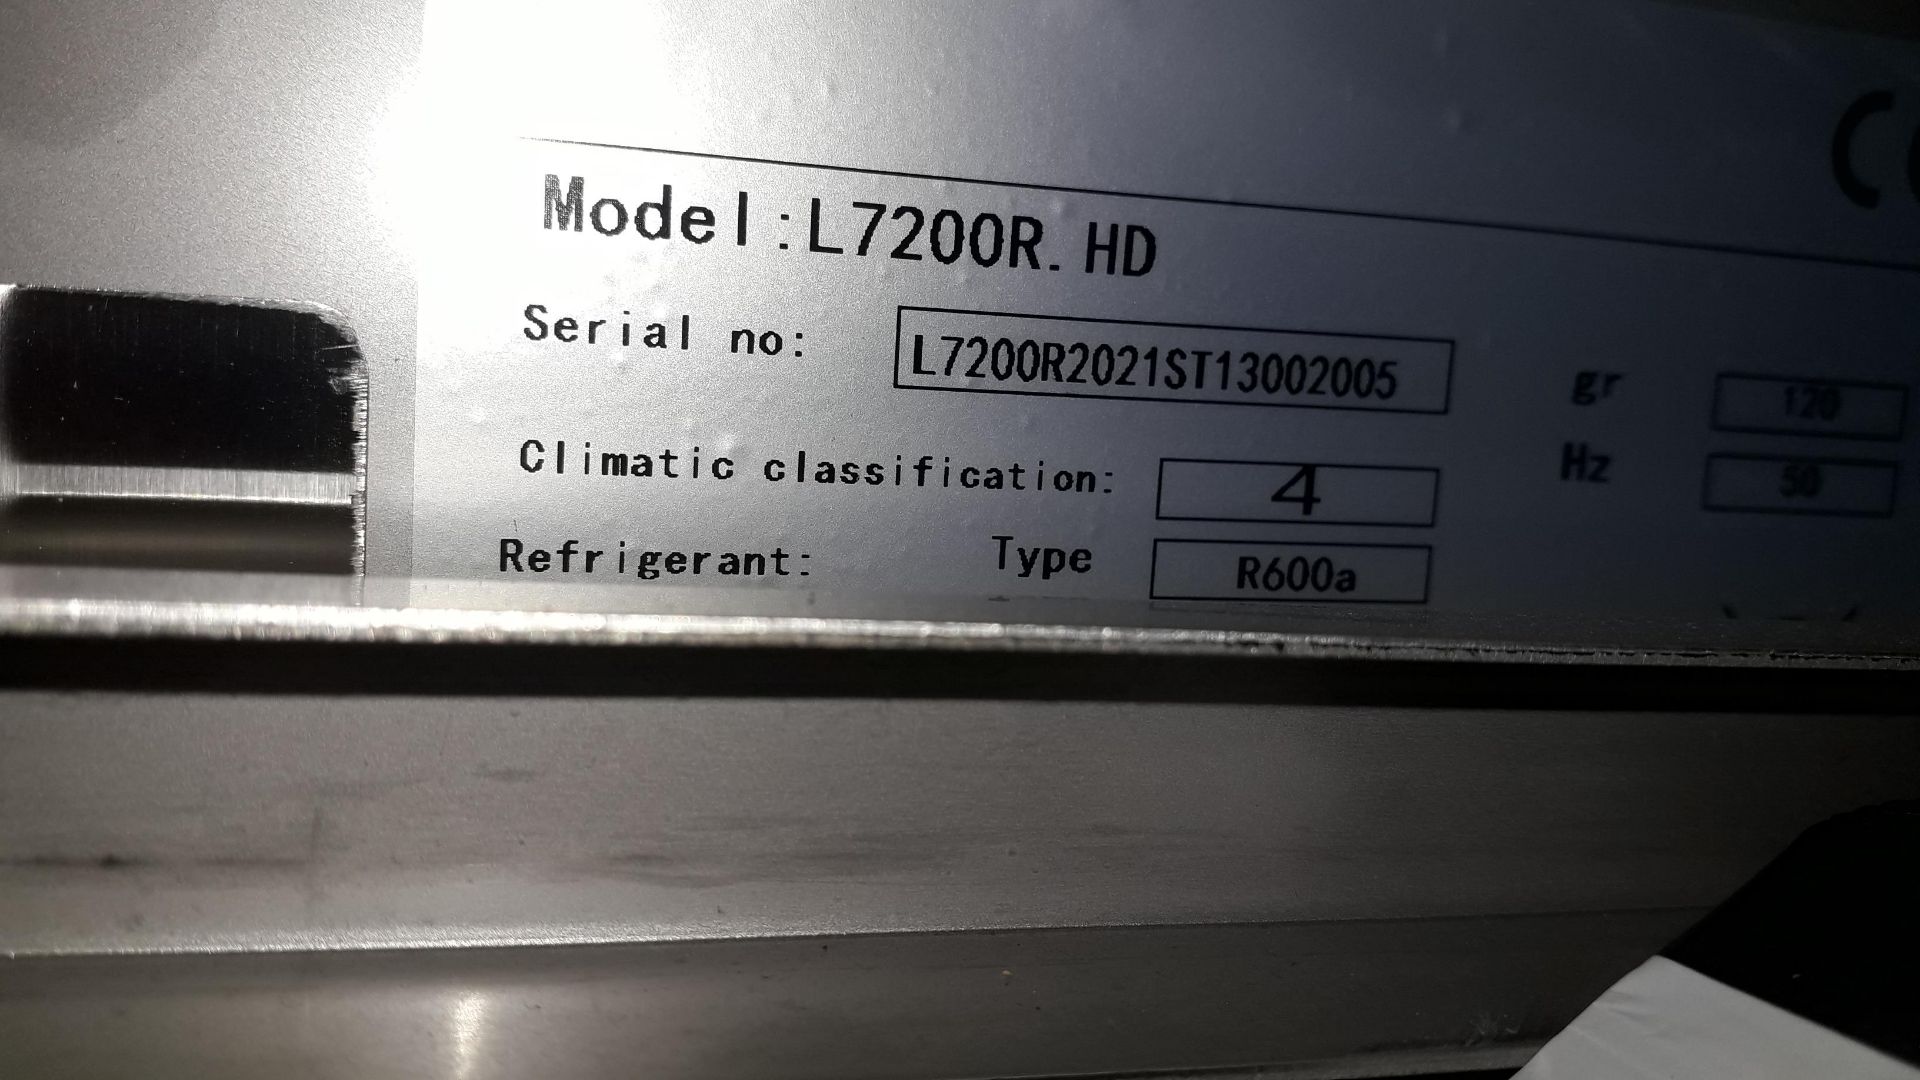 King L7200R.HD Stainless Steel 3 Door Counter Refrigerator Serial number LC7200R2021STI30002005 - Image 3 of 3